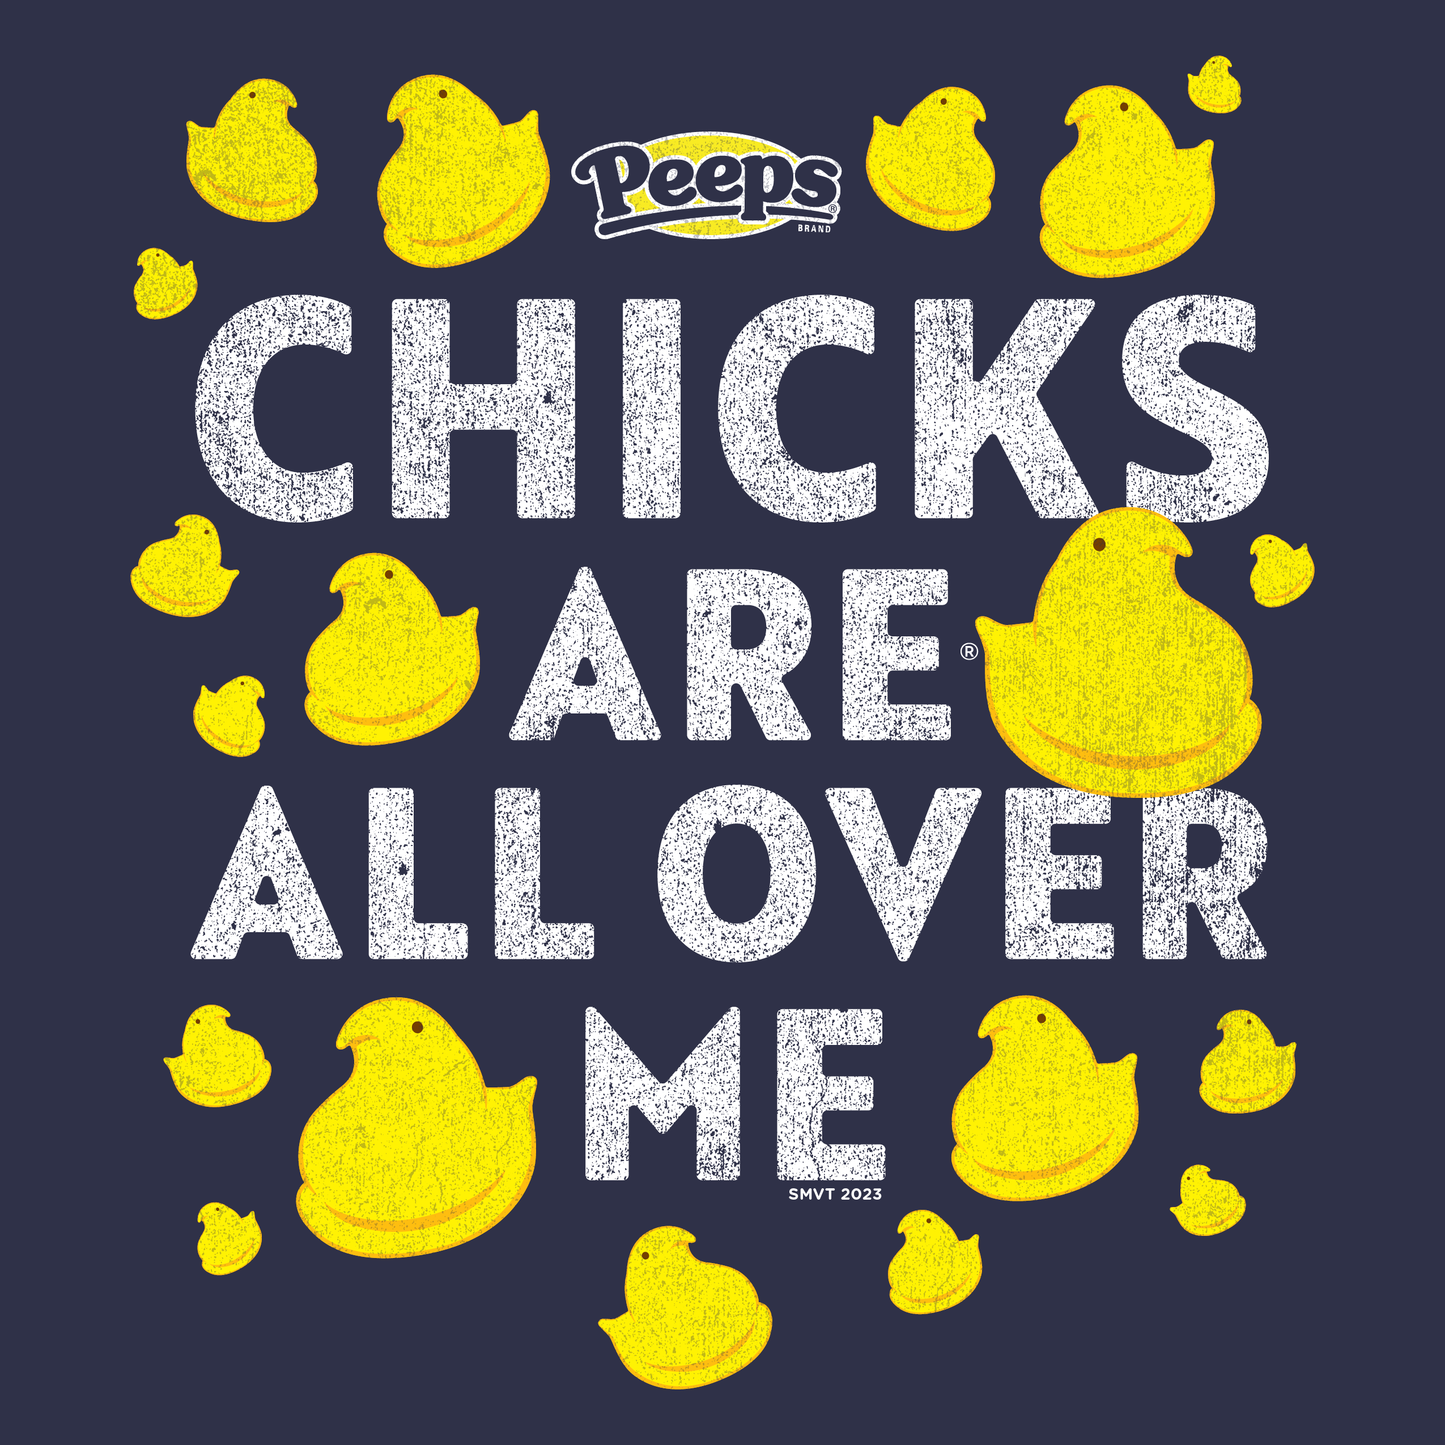 Peeps® Chicks Are All Over Me Unisex Graphic Tee